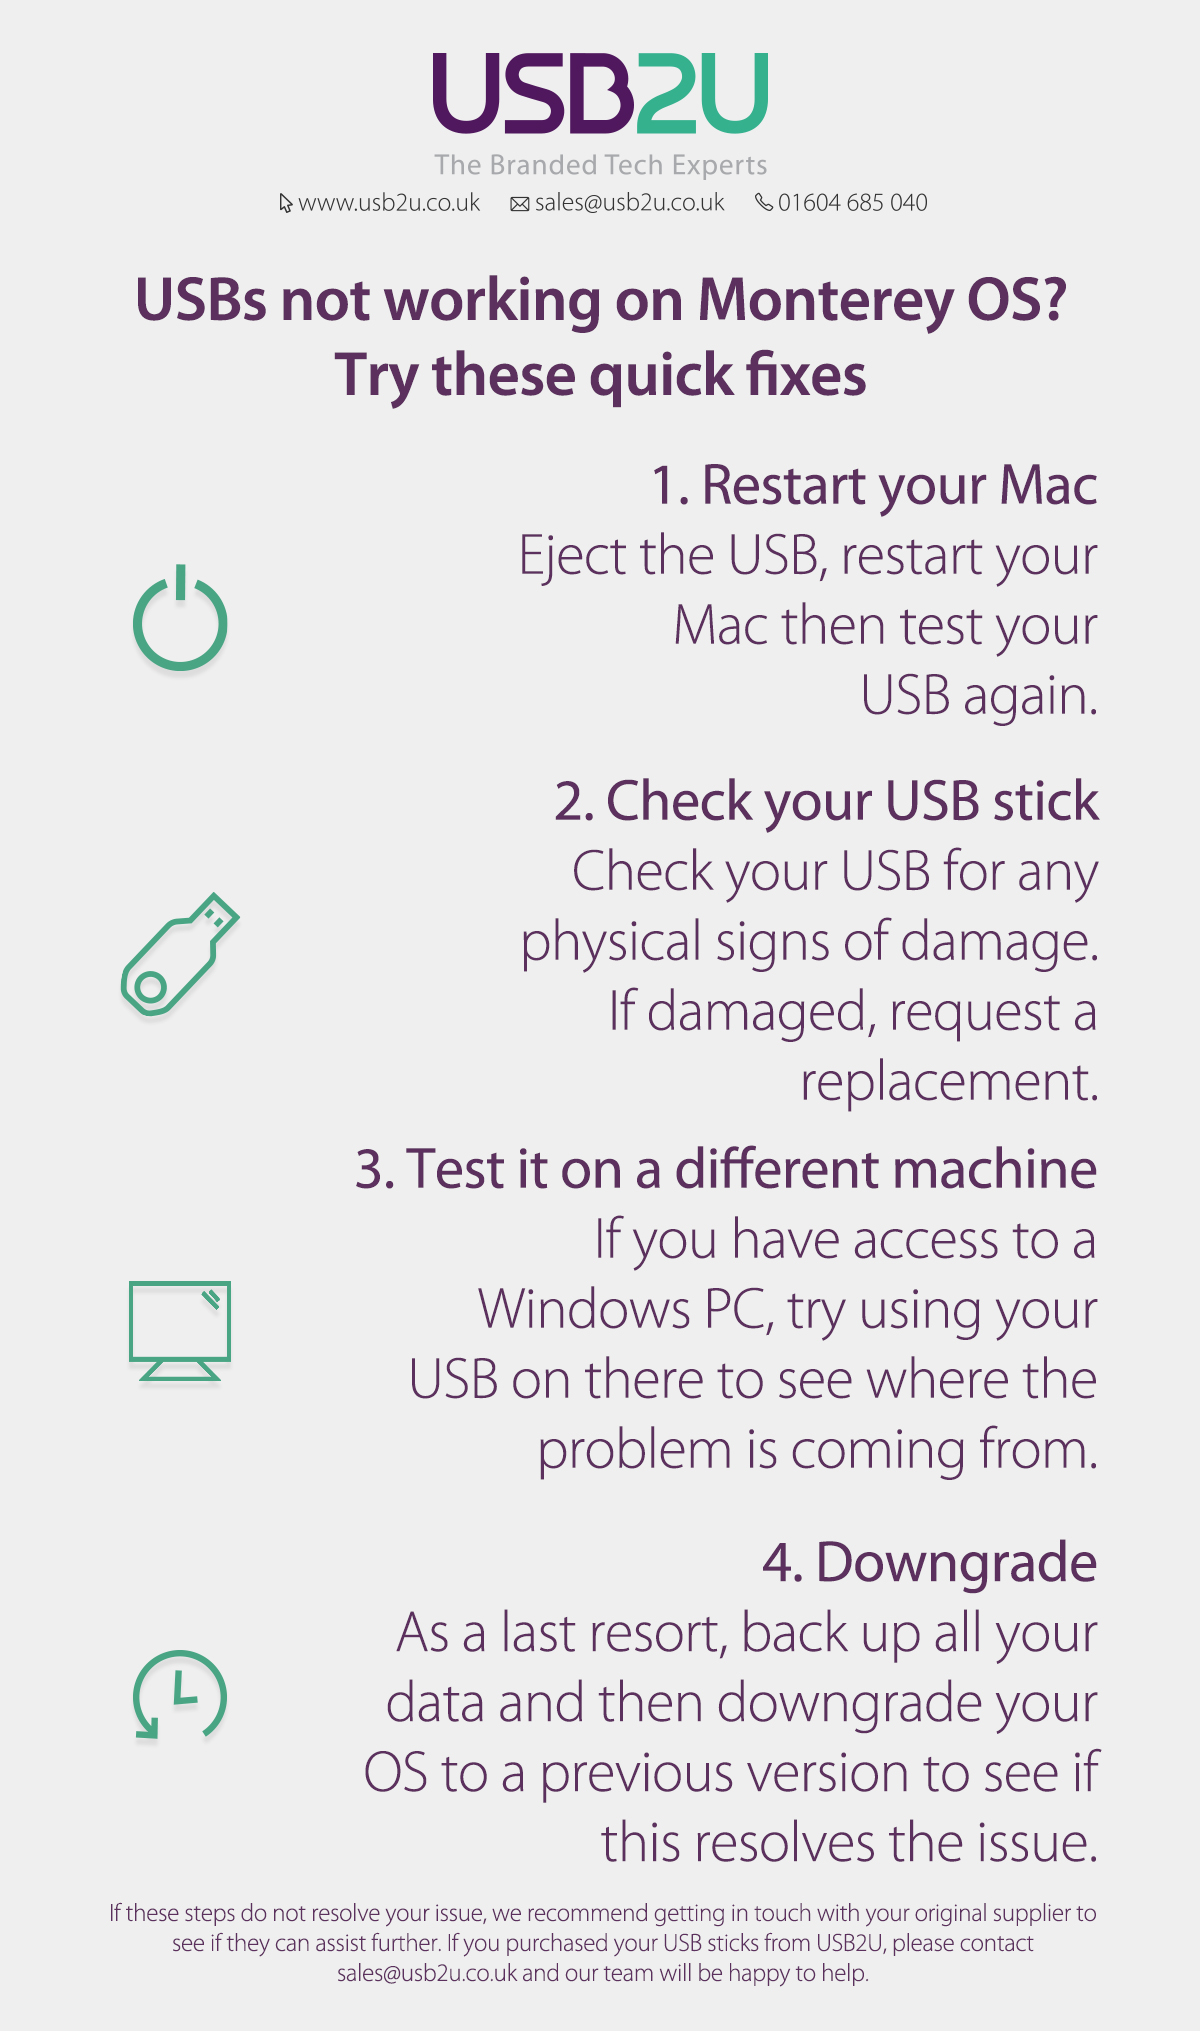 A troubleshoot guide on fixing issues with USB sticks on Macs running monteray software